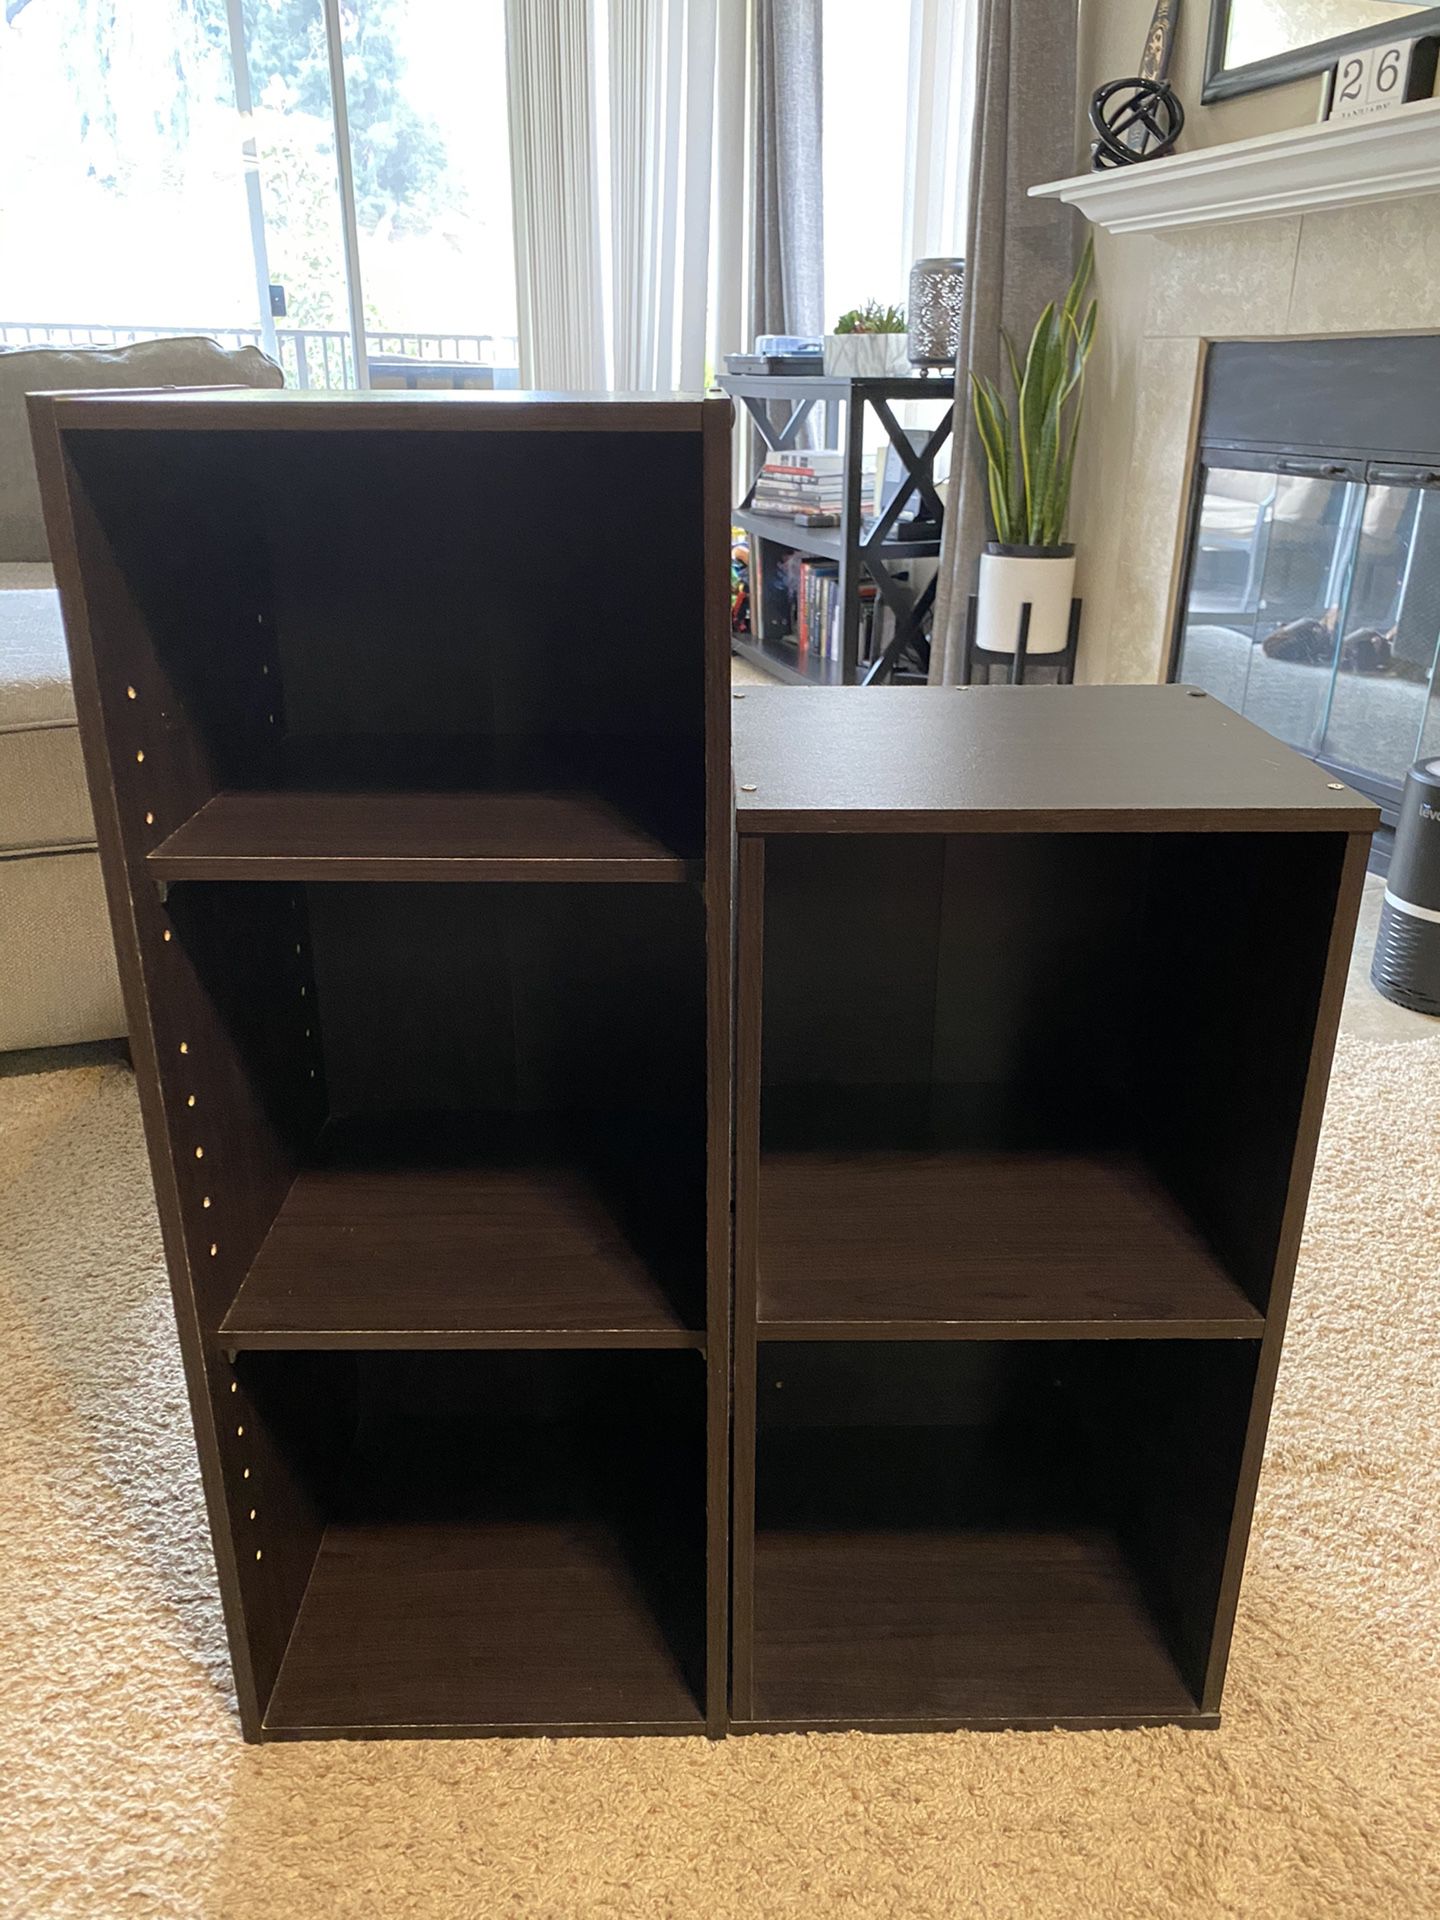 STORAGE CUBBY SHELVES FOR SALE